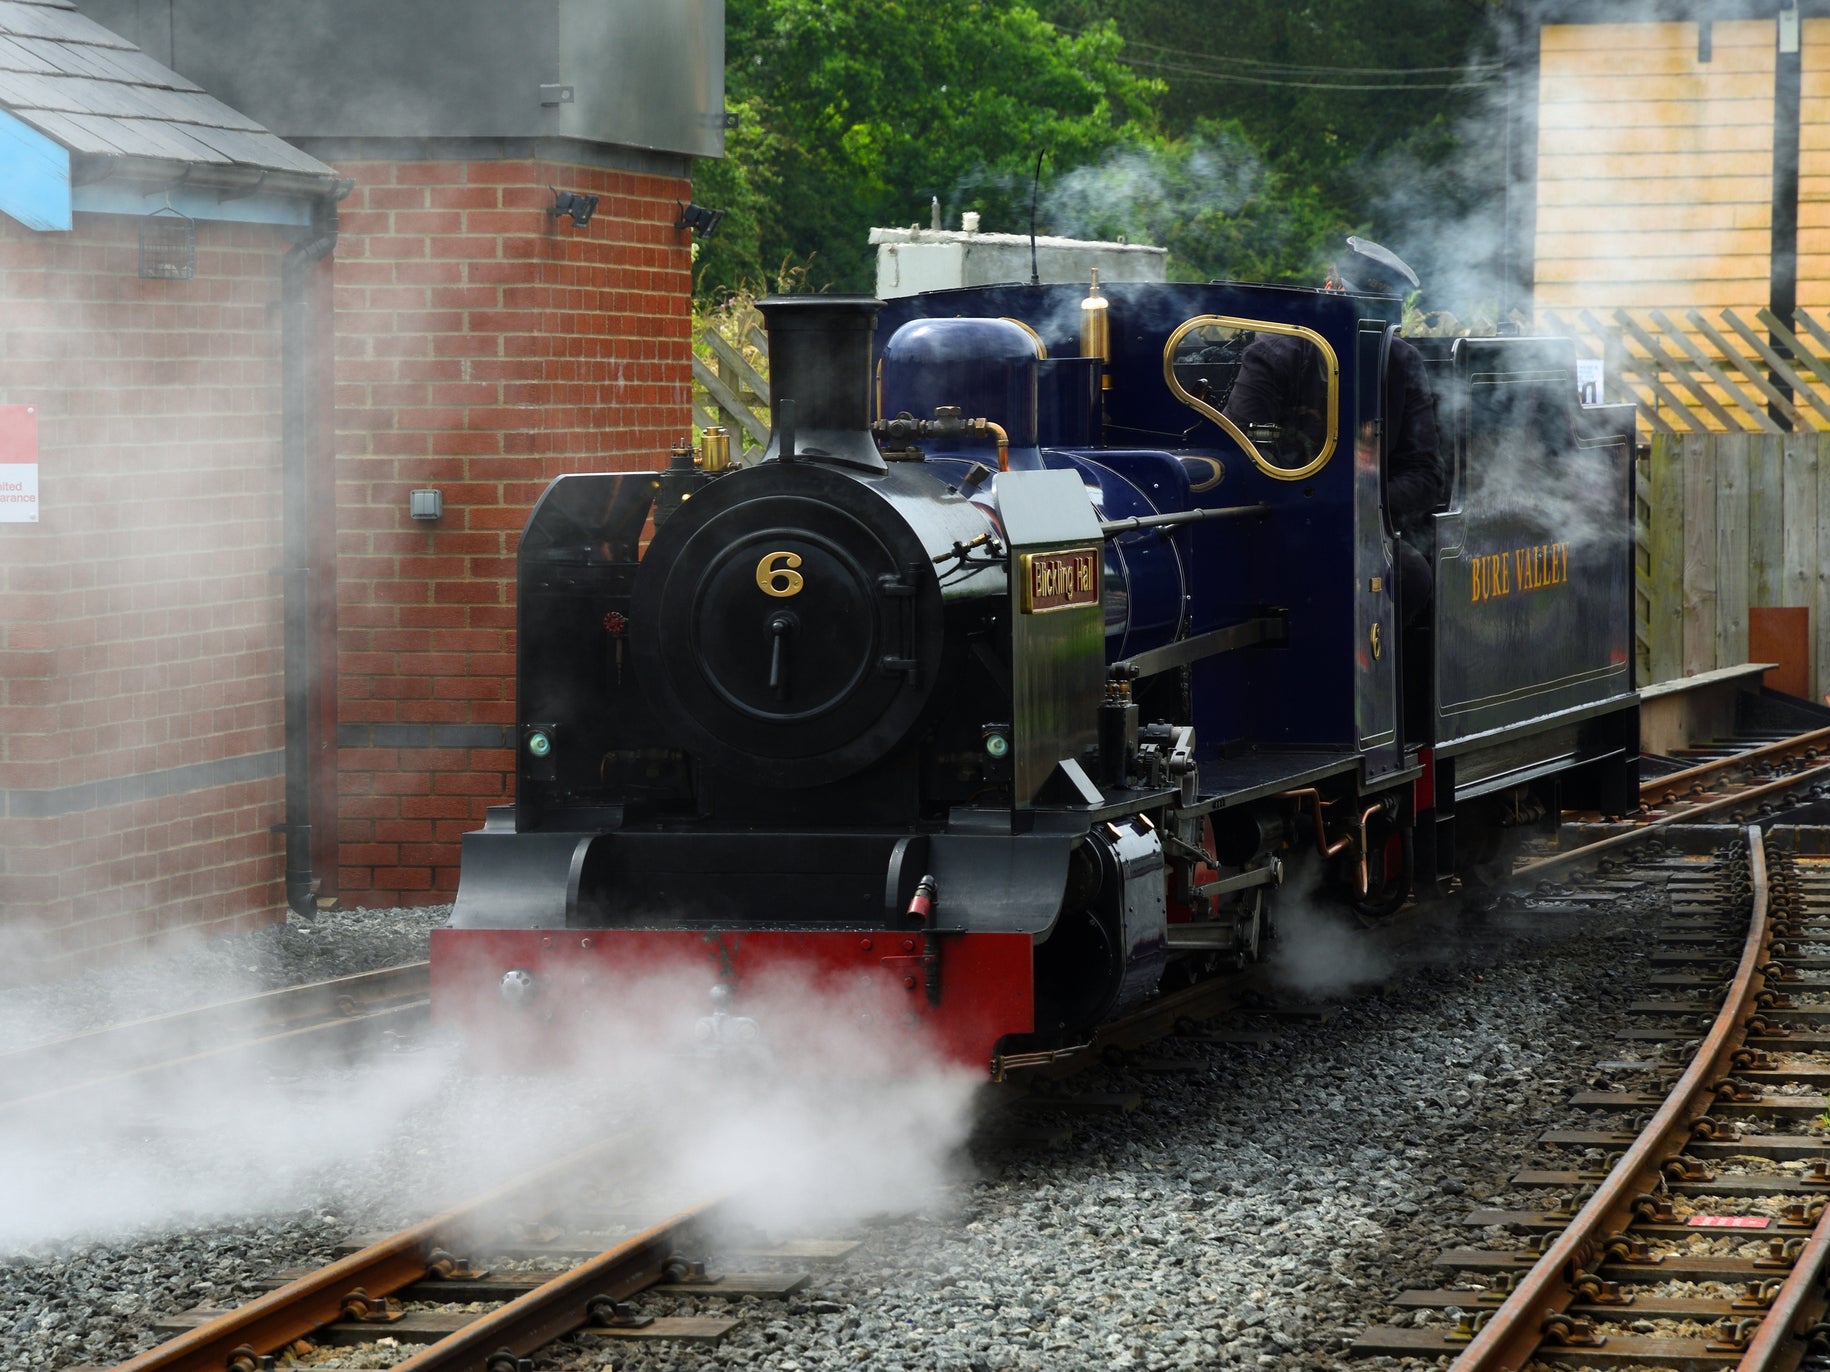 What more do you need on holiday than a heritage railway?